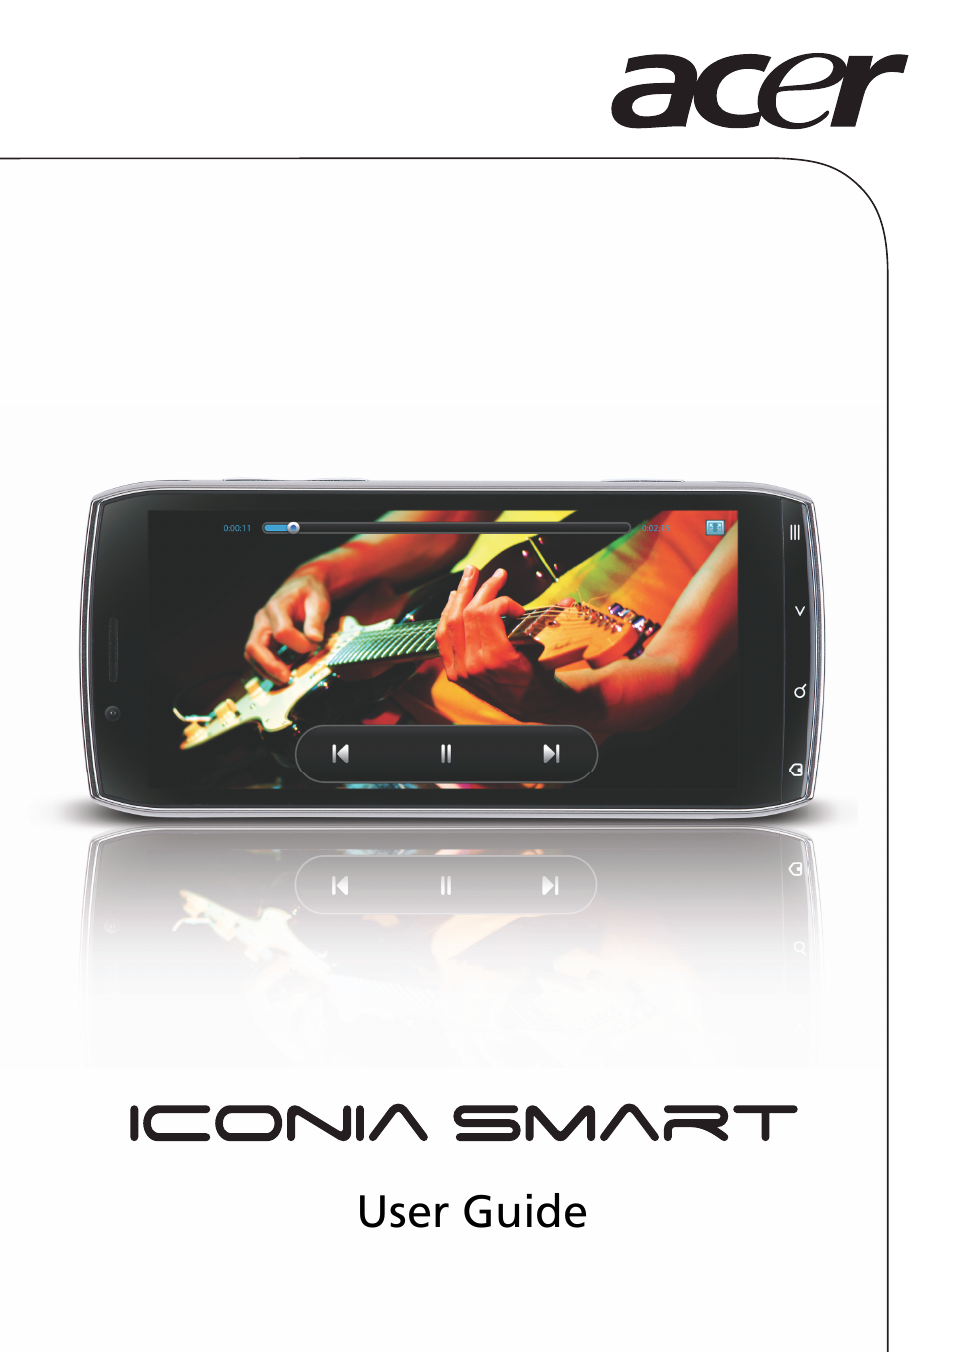 ICONIA SMART (S300) (Page 1)